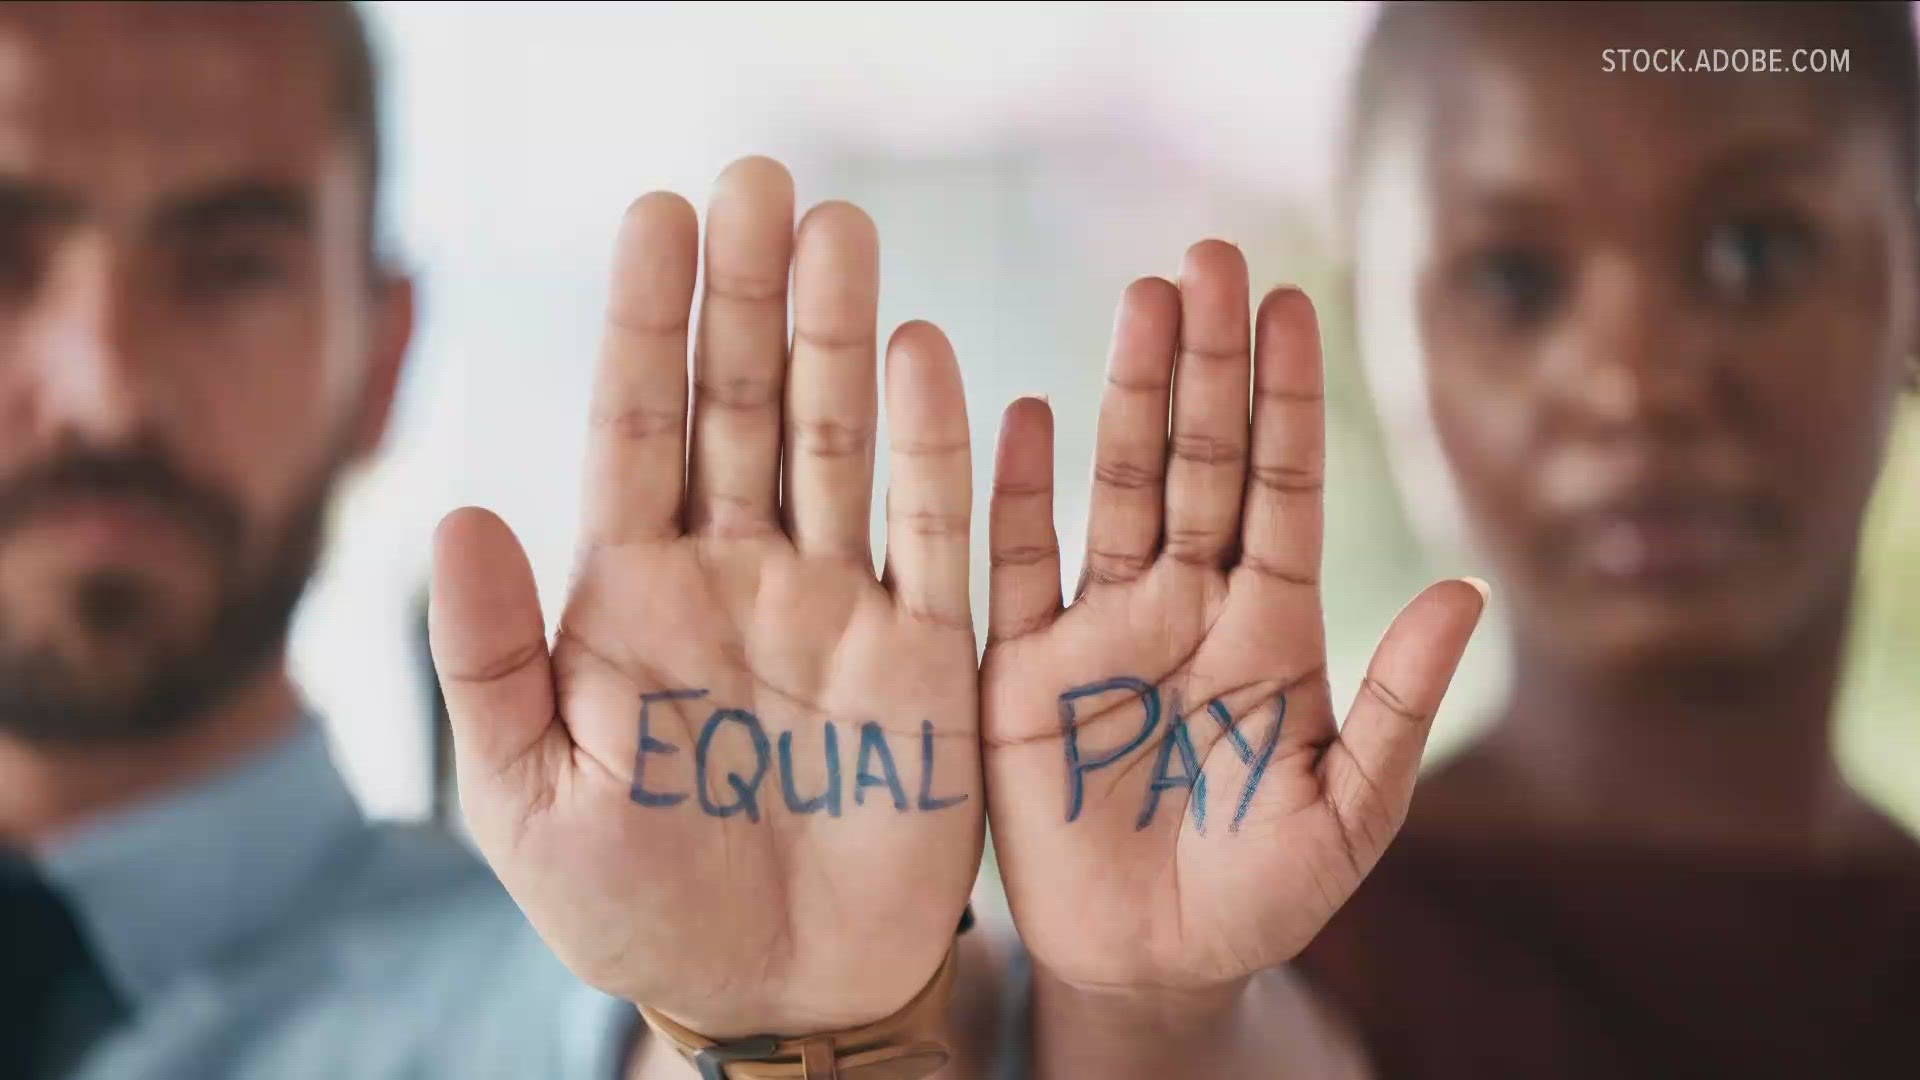 Equal Pay Day marks the day women have worked enough to catch up to what men made the year prior.